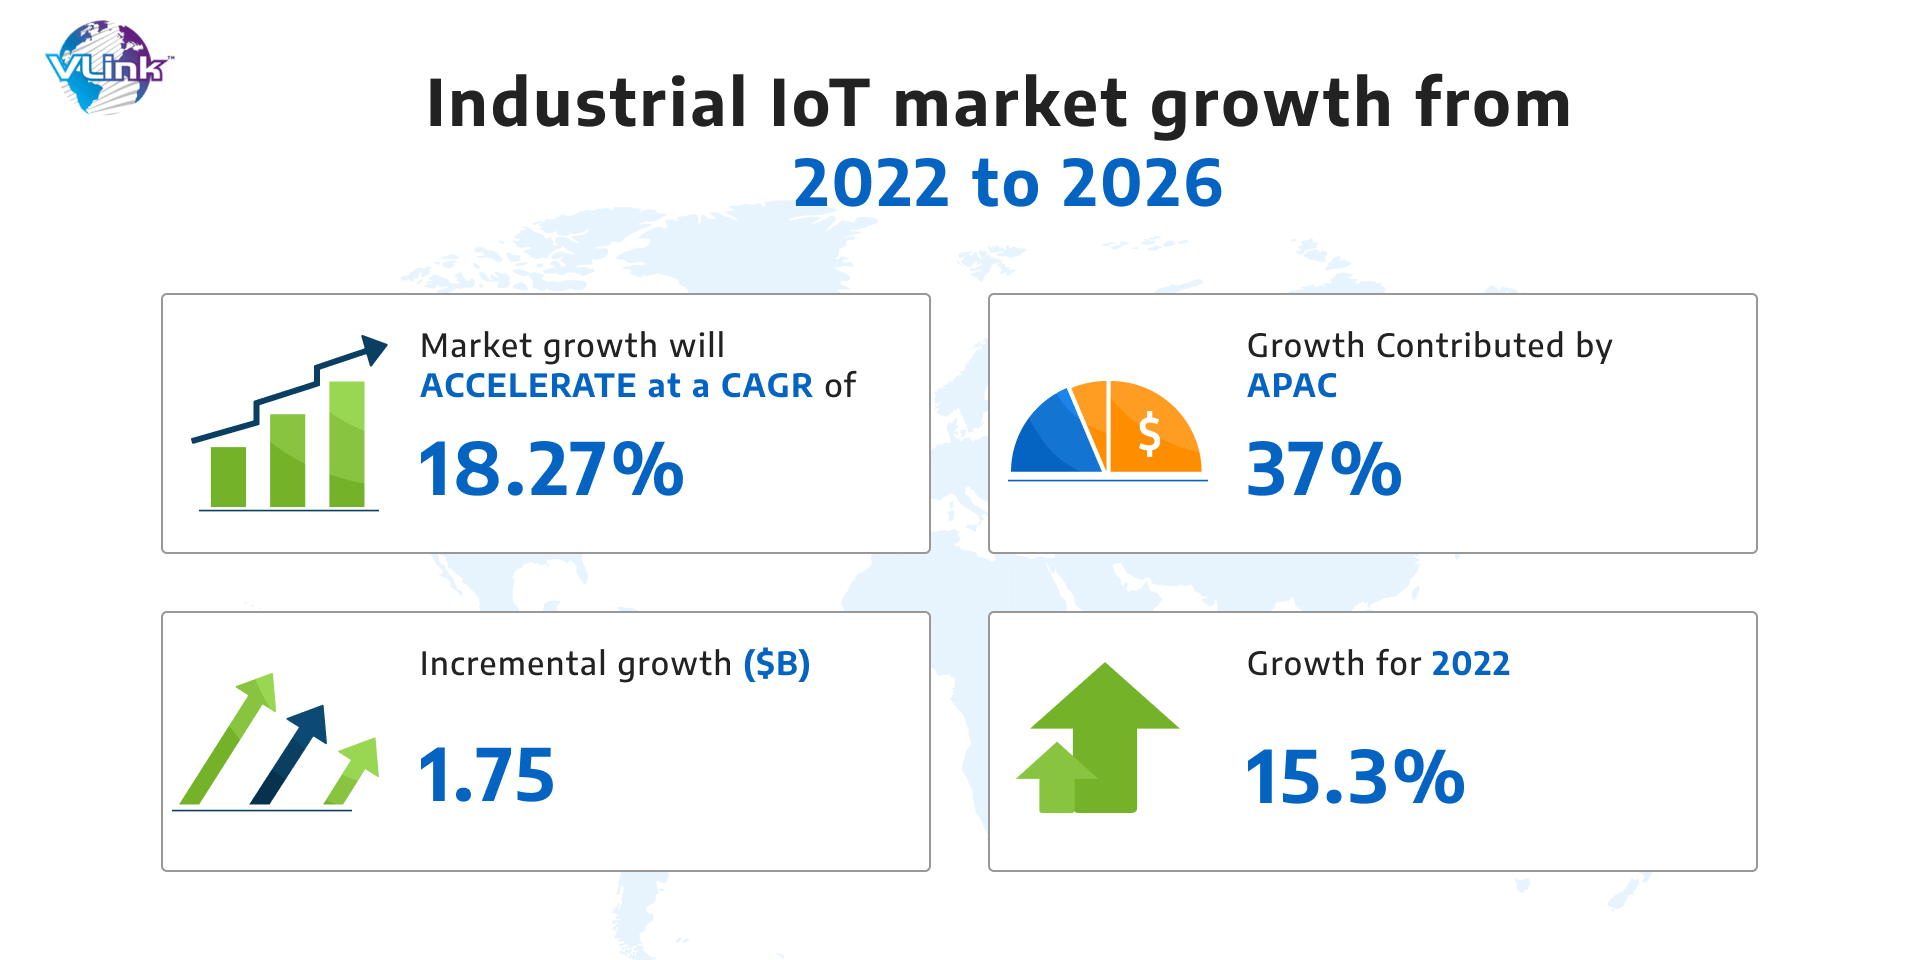 Industrial IoT market growth from 2022 to 2026